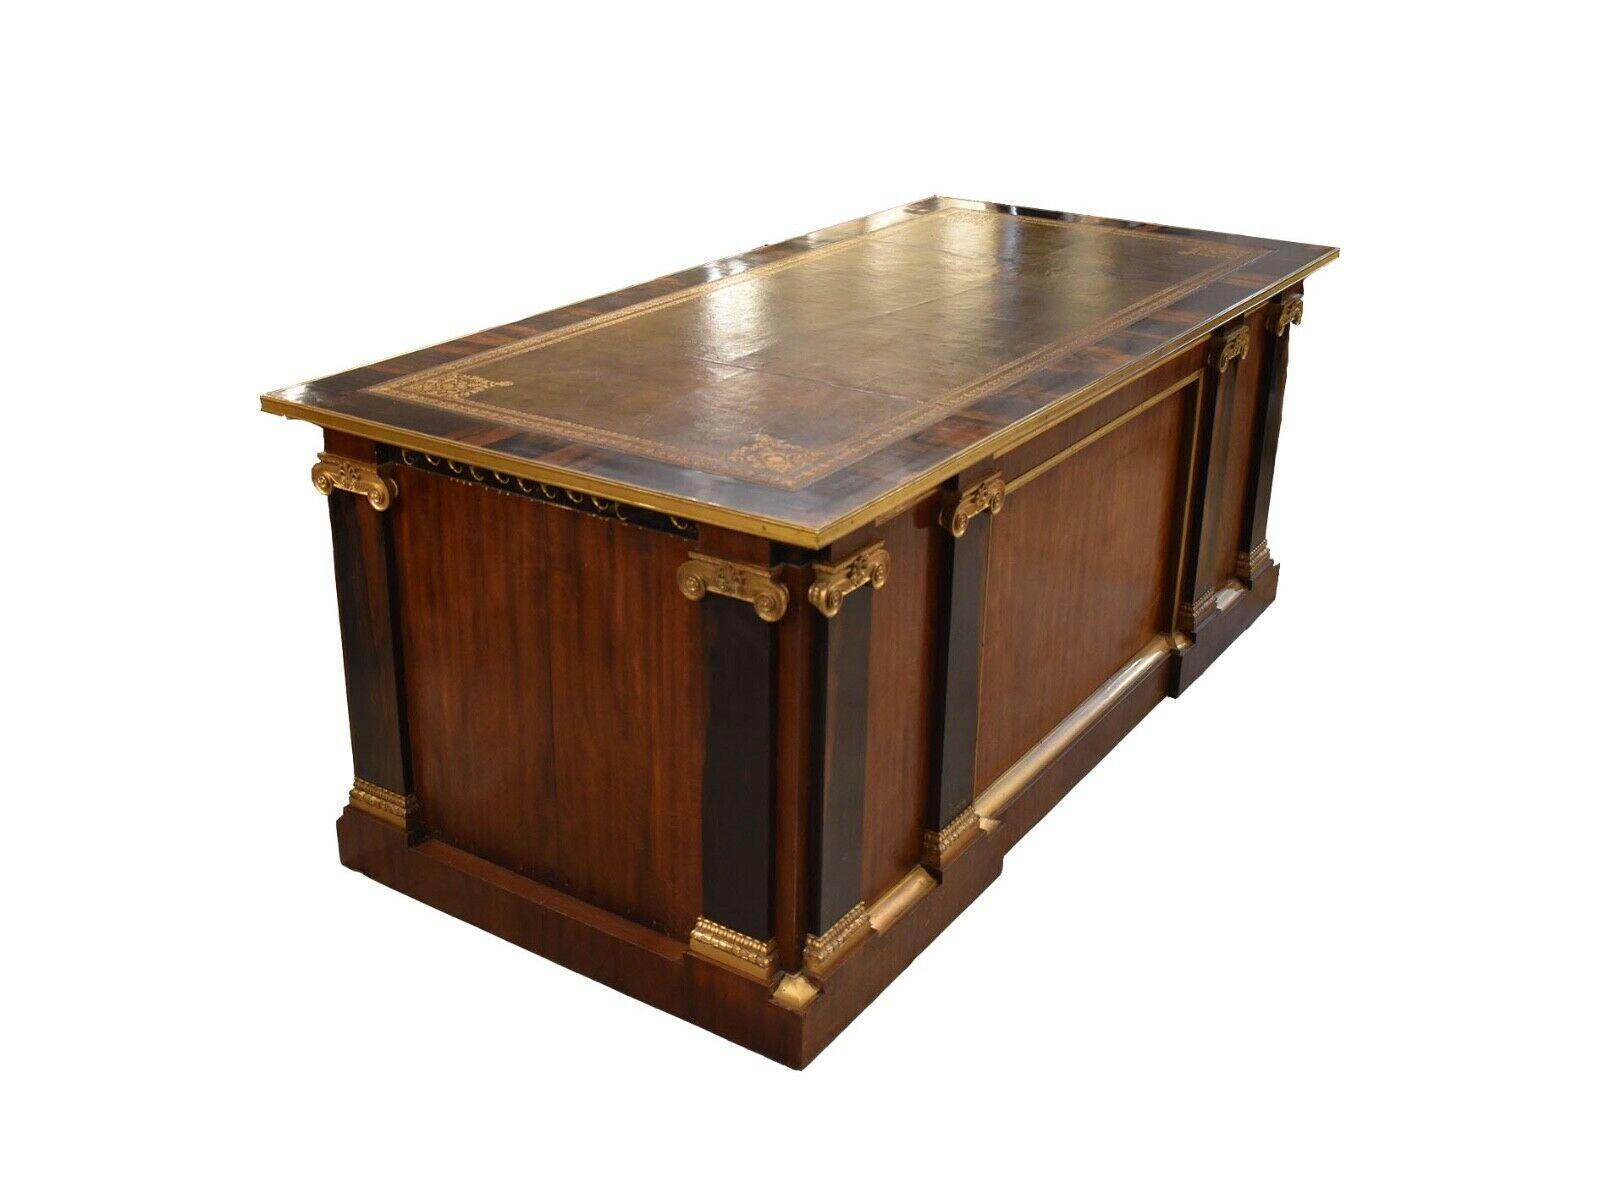 An Impressively large Calamander wooden antique desk. 

This quality crafted piece designed in a rare grand French Empire style with ormolu topped pilasters and vituvian scroll details. 

The drawers are mahogany fronted and oak lined with an